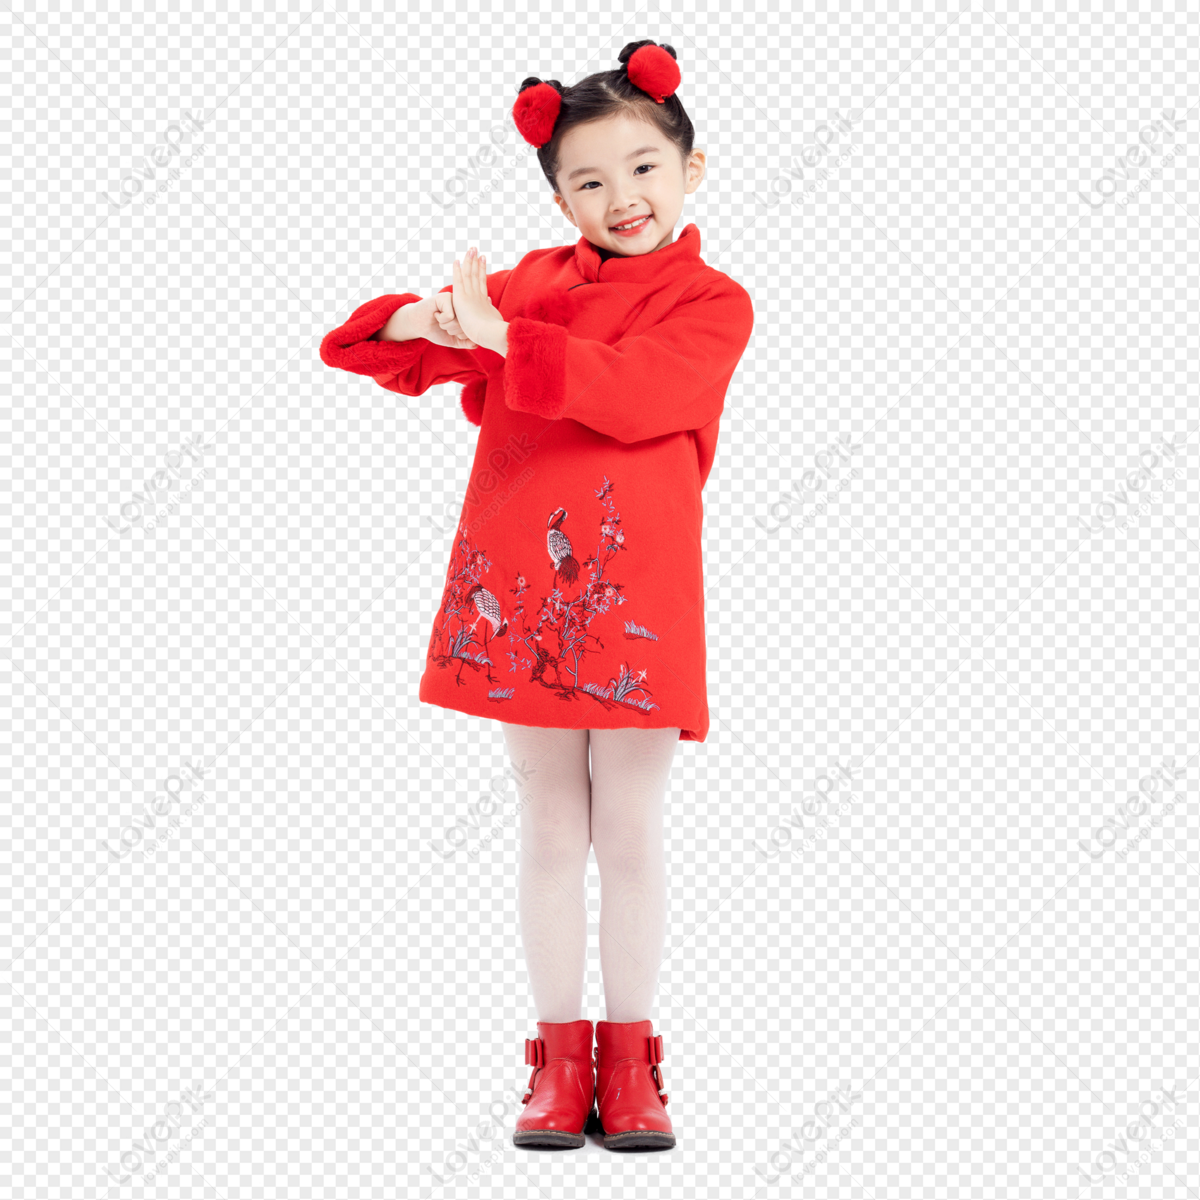 Chinese New Year, The Image Of Children Free PNG And Clipart Image For ...